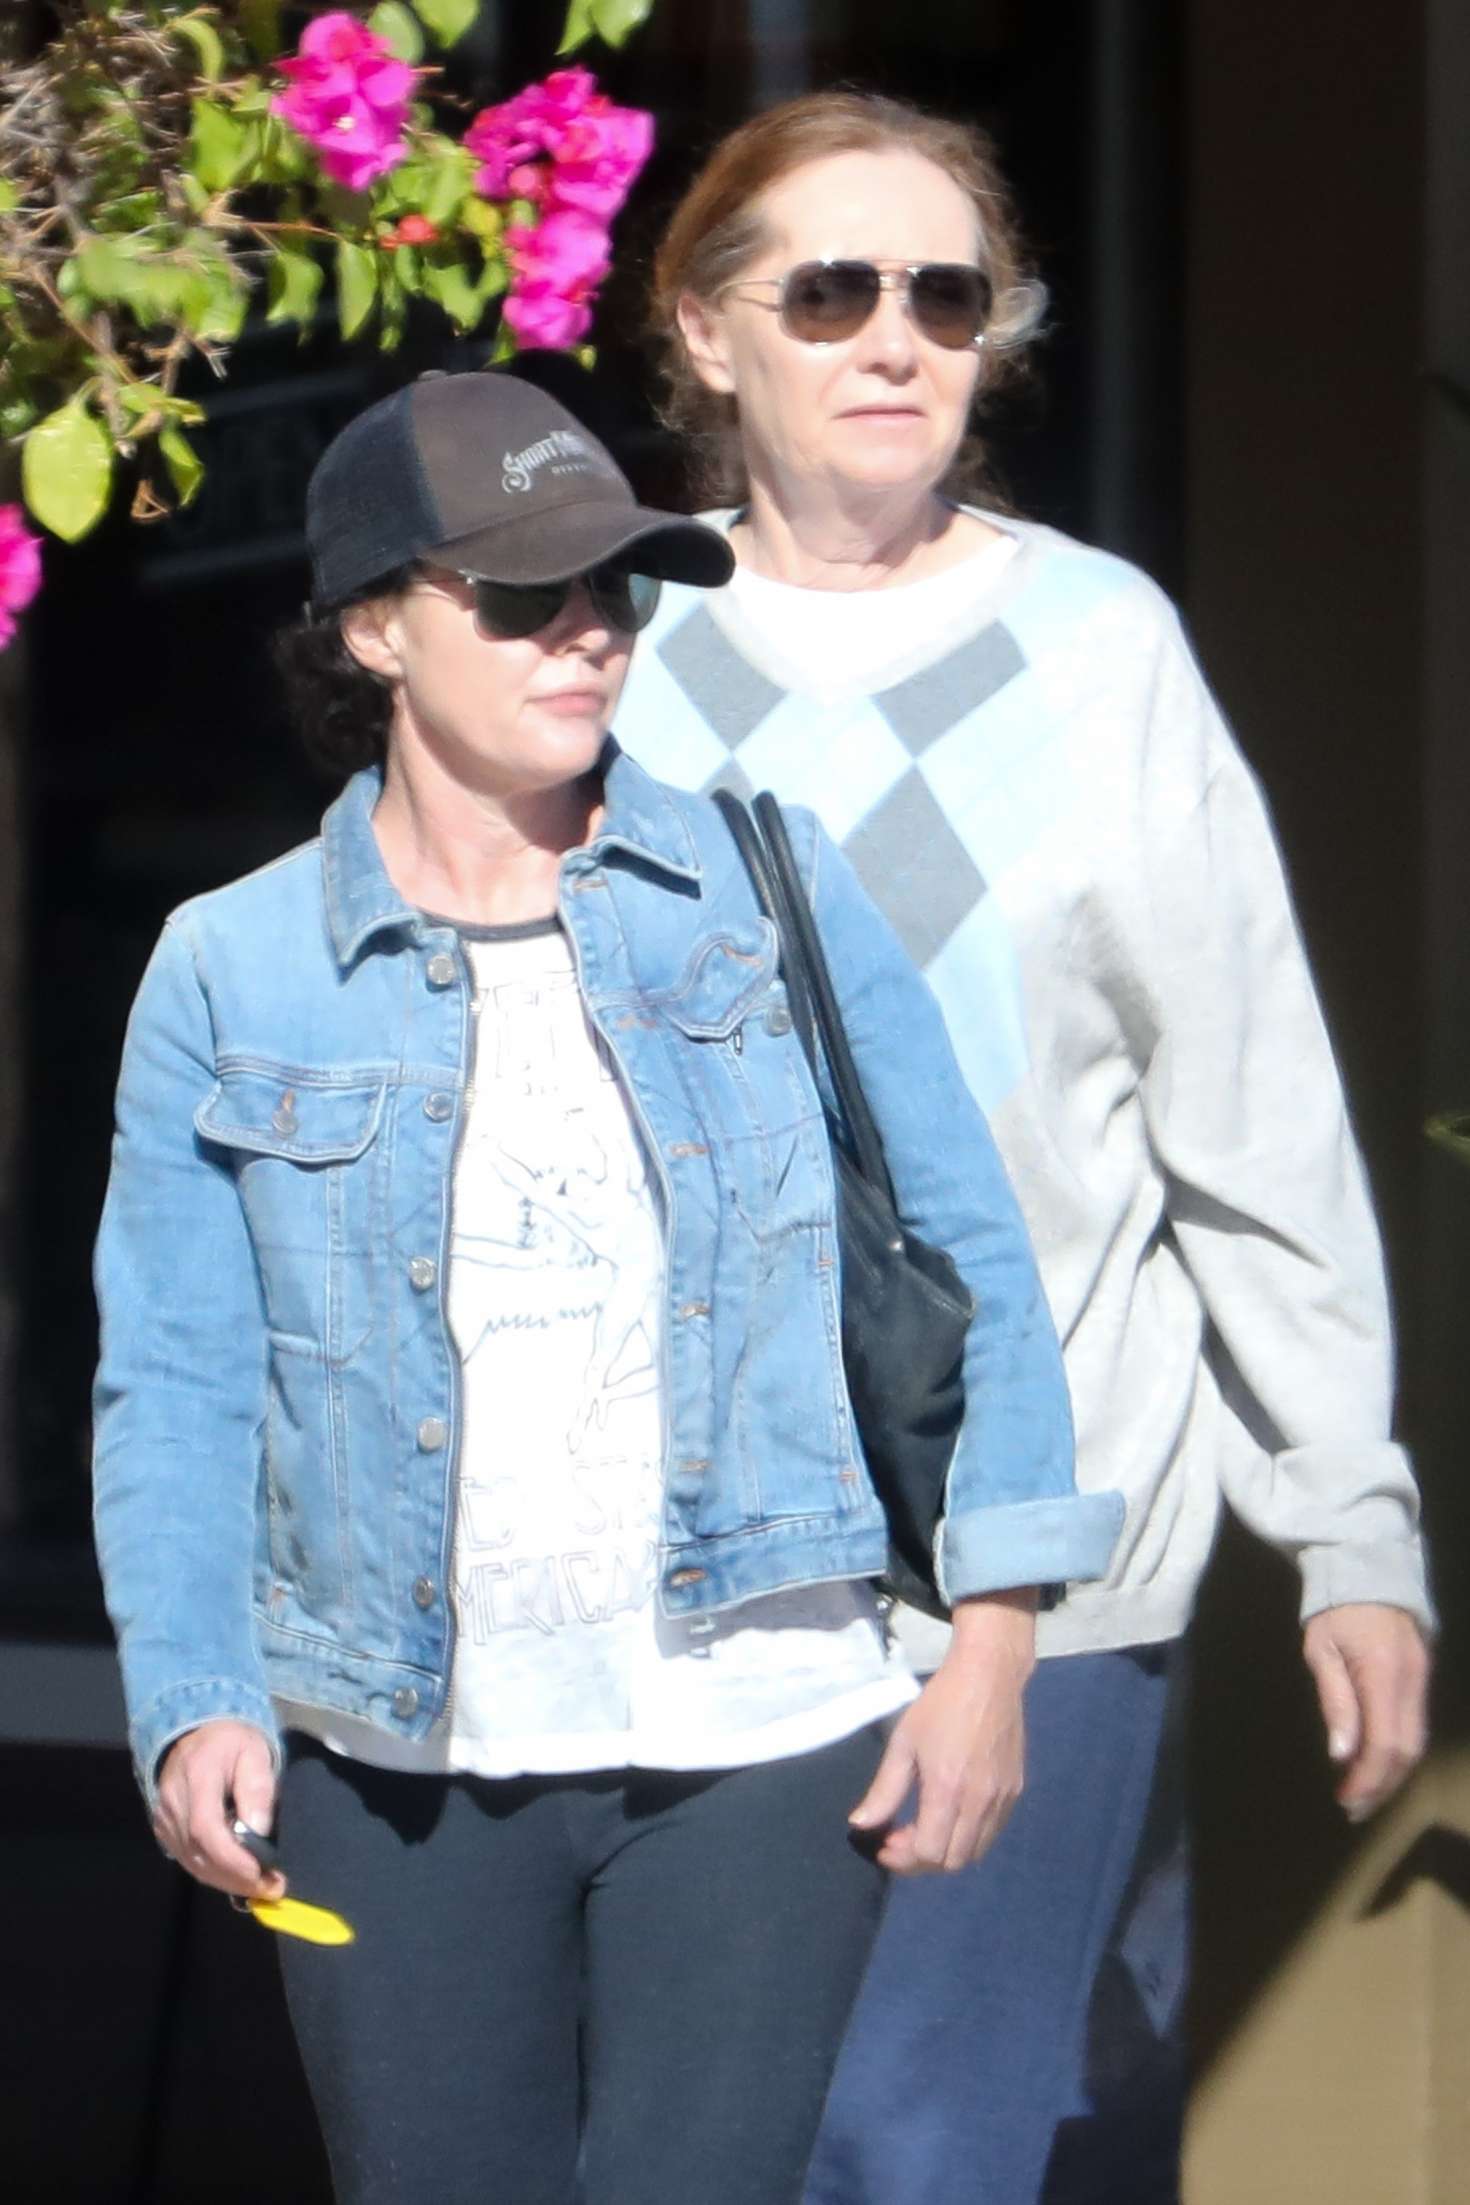 Shannen Doherty with her mom out for lunch in Malibu